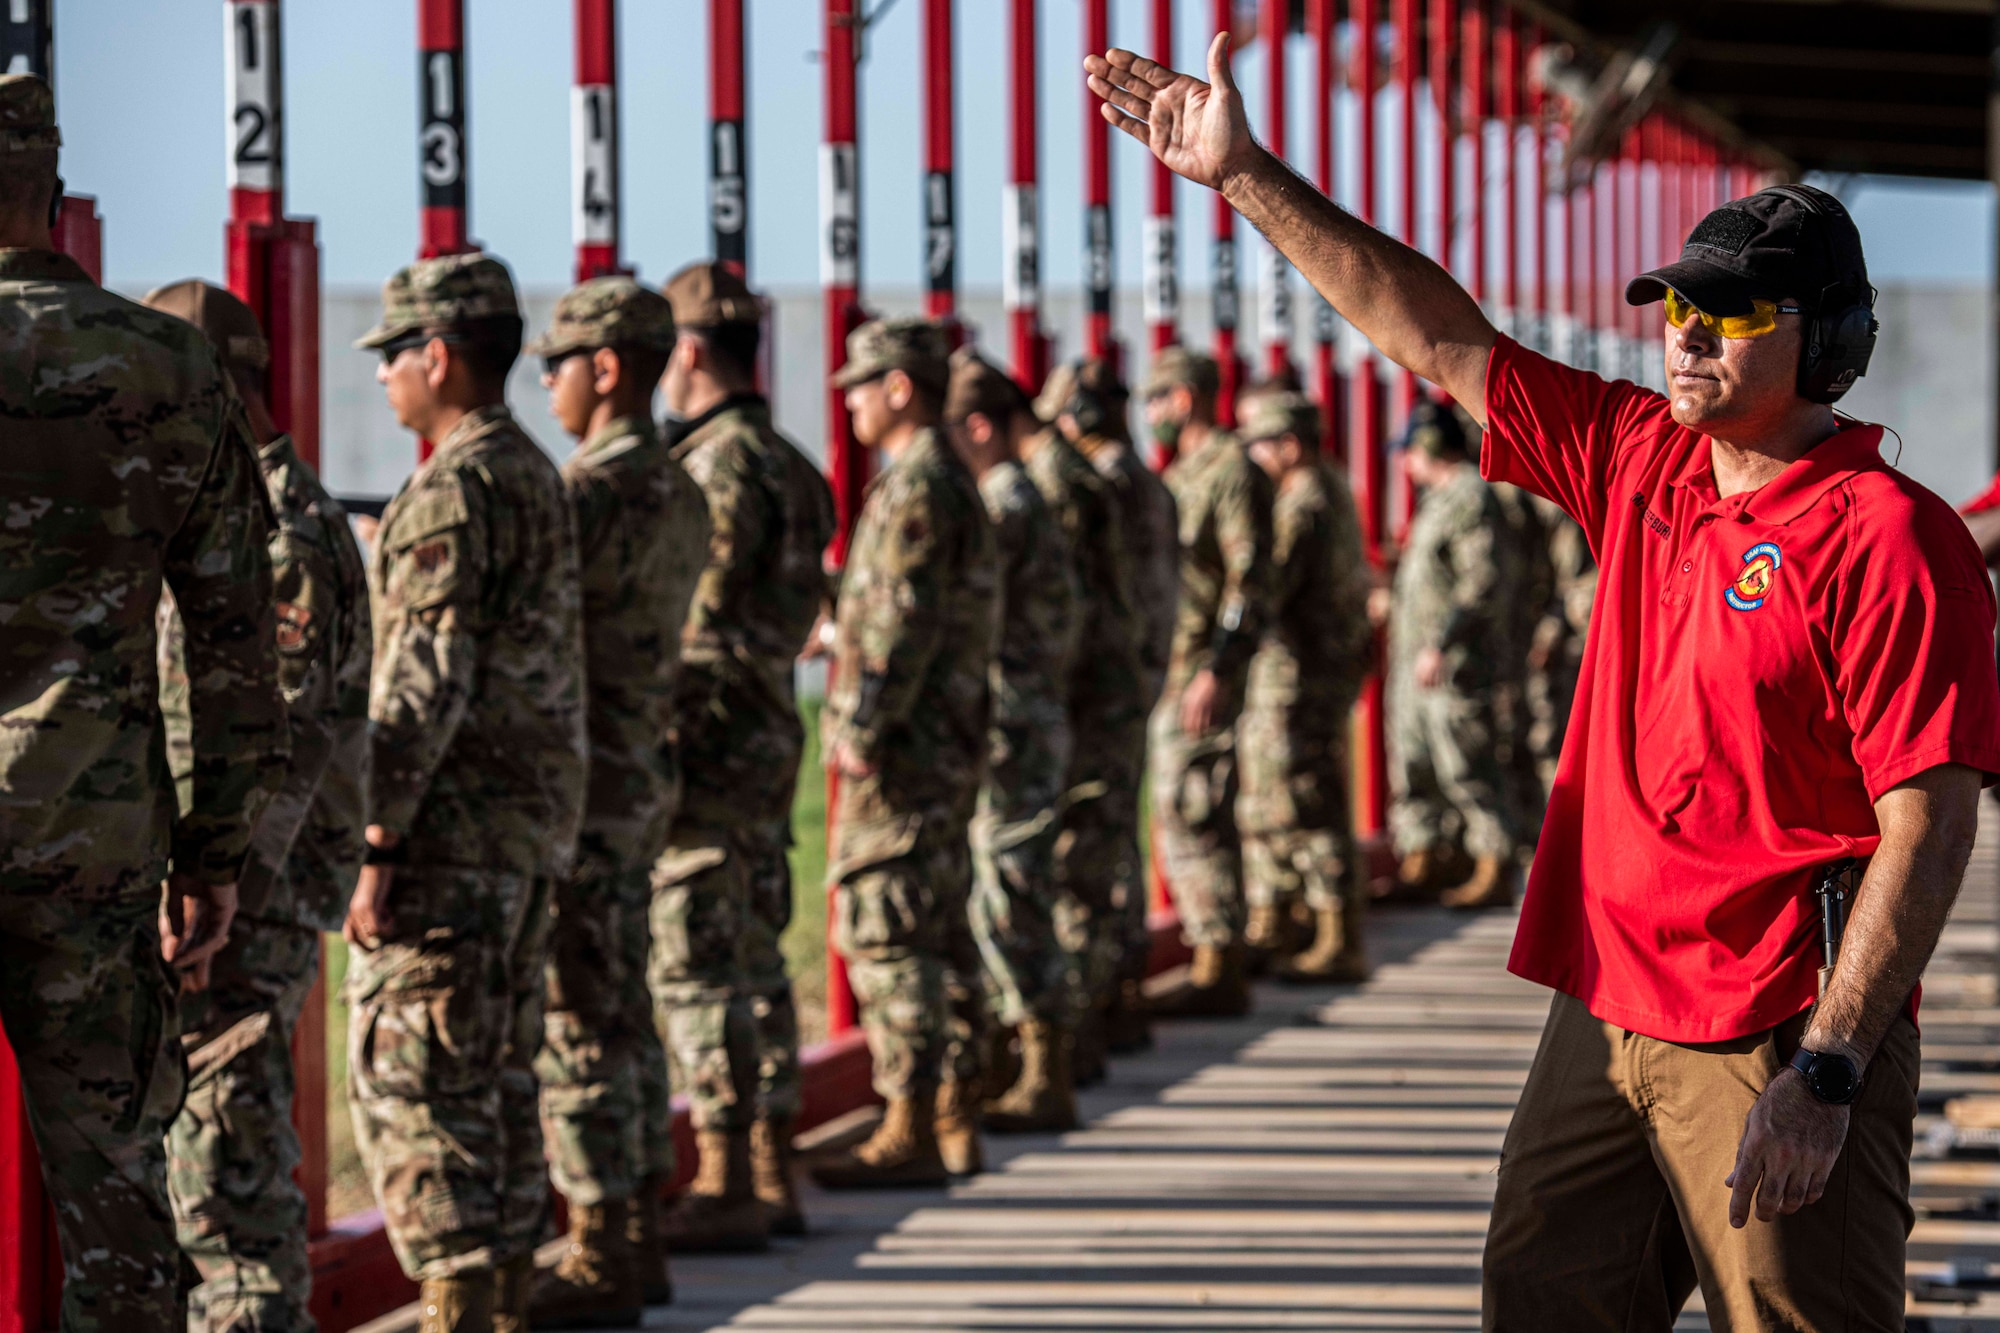 Instructor in red shirt signals during competition